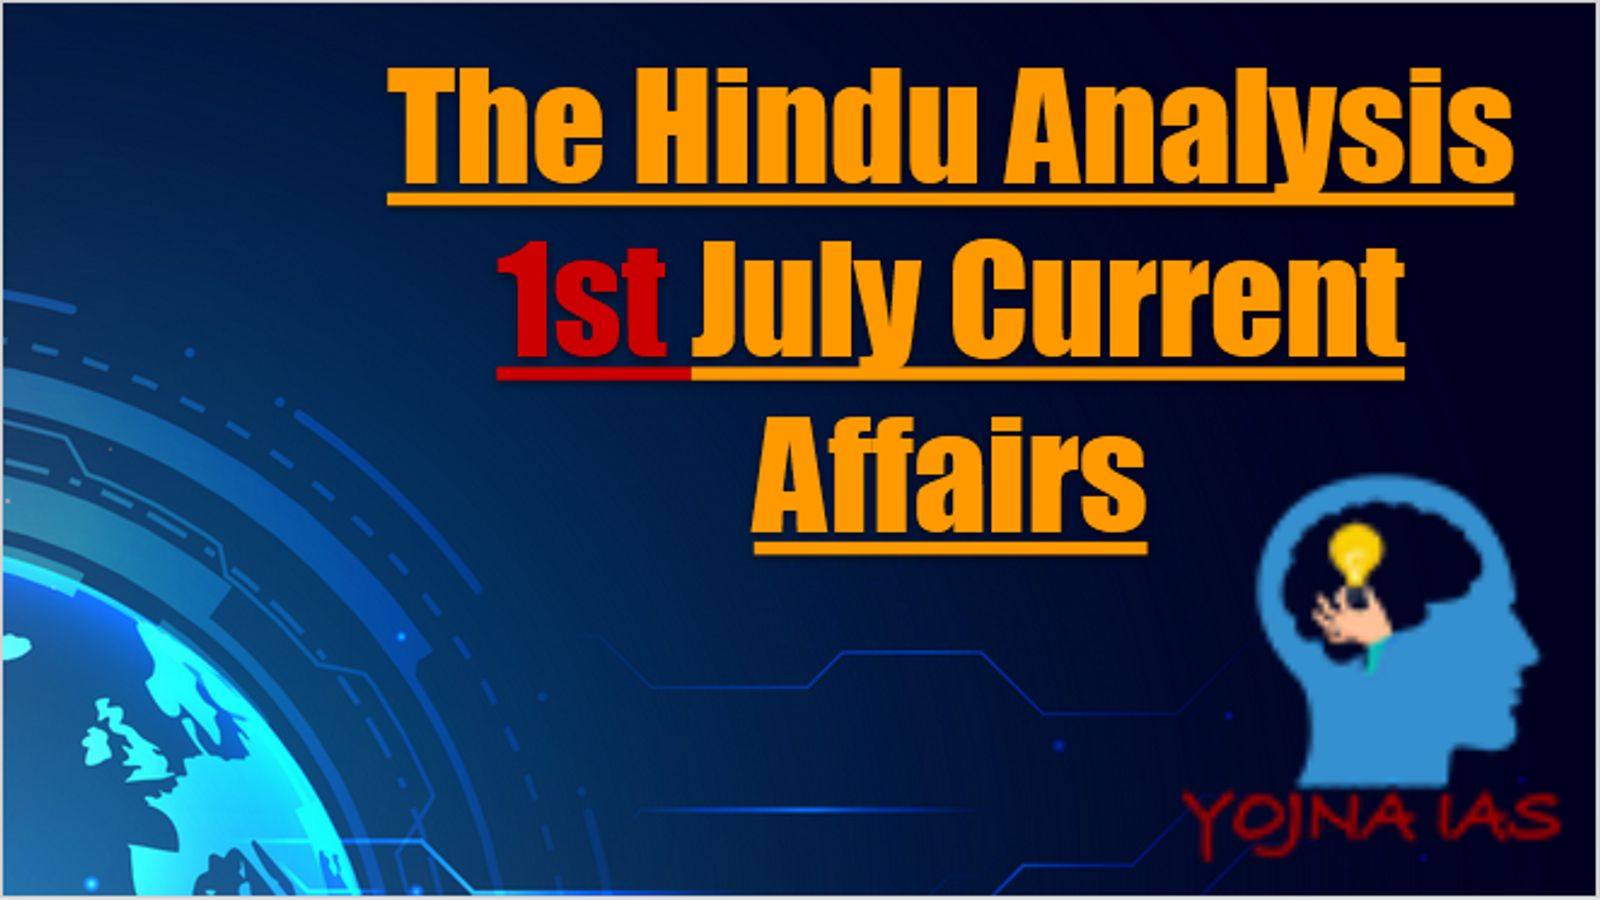 Today Current Affairs 1st July